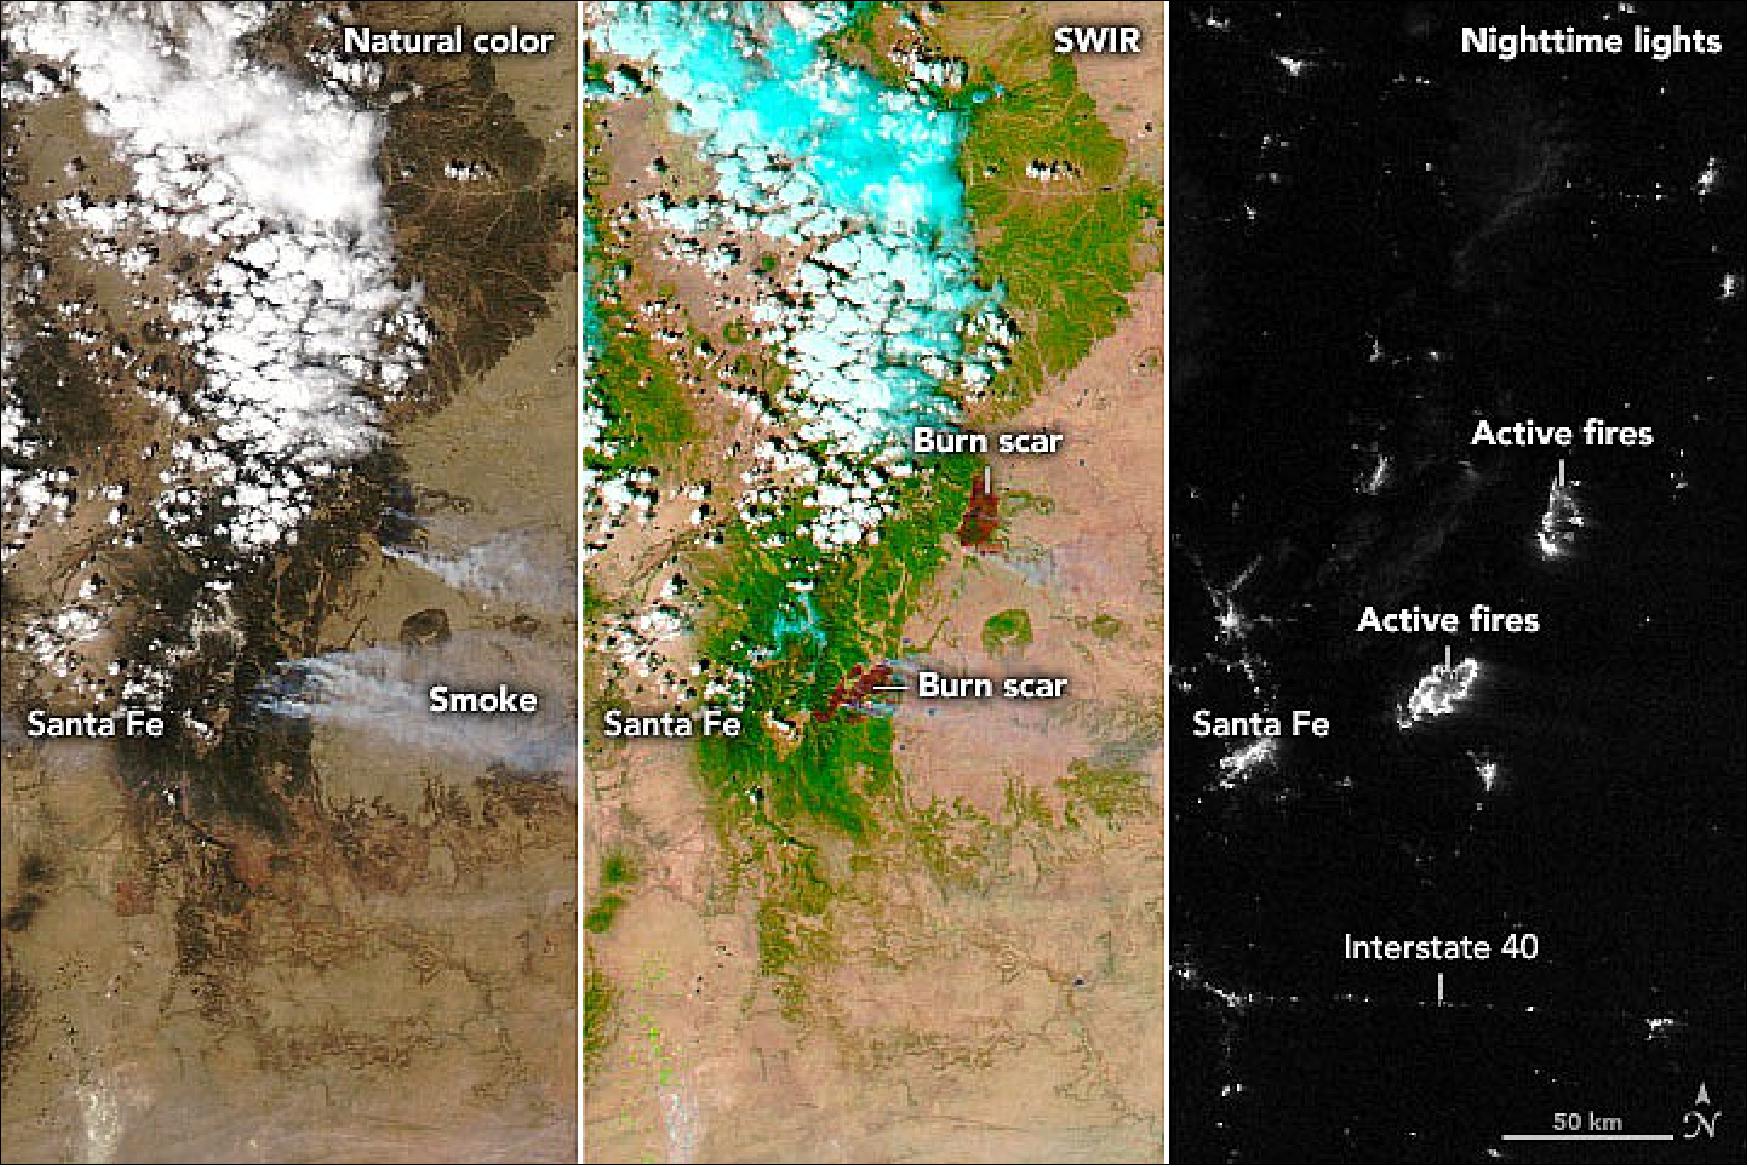 Figure 27: These images provide three satellite views of the area near Santa Fe on April 23. The natural-color and false-color (shortwave infrared and visible light, bands 7-2-1) images were acquired by the MODIS instrument on NASA’s Aqua satellite. The false-color view makes it easier to distinguish the burn scar on the landscape. The nighttime view was acquired around 2 a.m. local time on April 23 with the Visible Infrared Imaging Radiometer Suite (VIIRS) on the NOAA-NASA Suomi NPP satellite (image credit: NASA Earth Observatory images by Joshua Stevens, using MODIS data from NASA EOSDIS LANCE and GIBS/Worldview, and the Suomi National Polar-orbiting Partnership (SuomiNPP). Story by Michael Carlowicz)